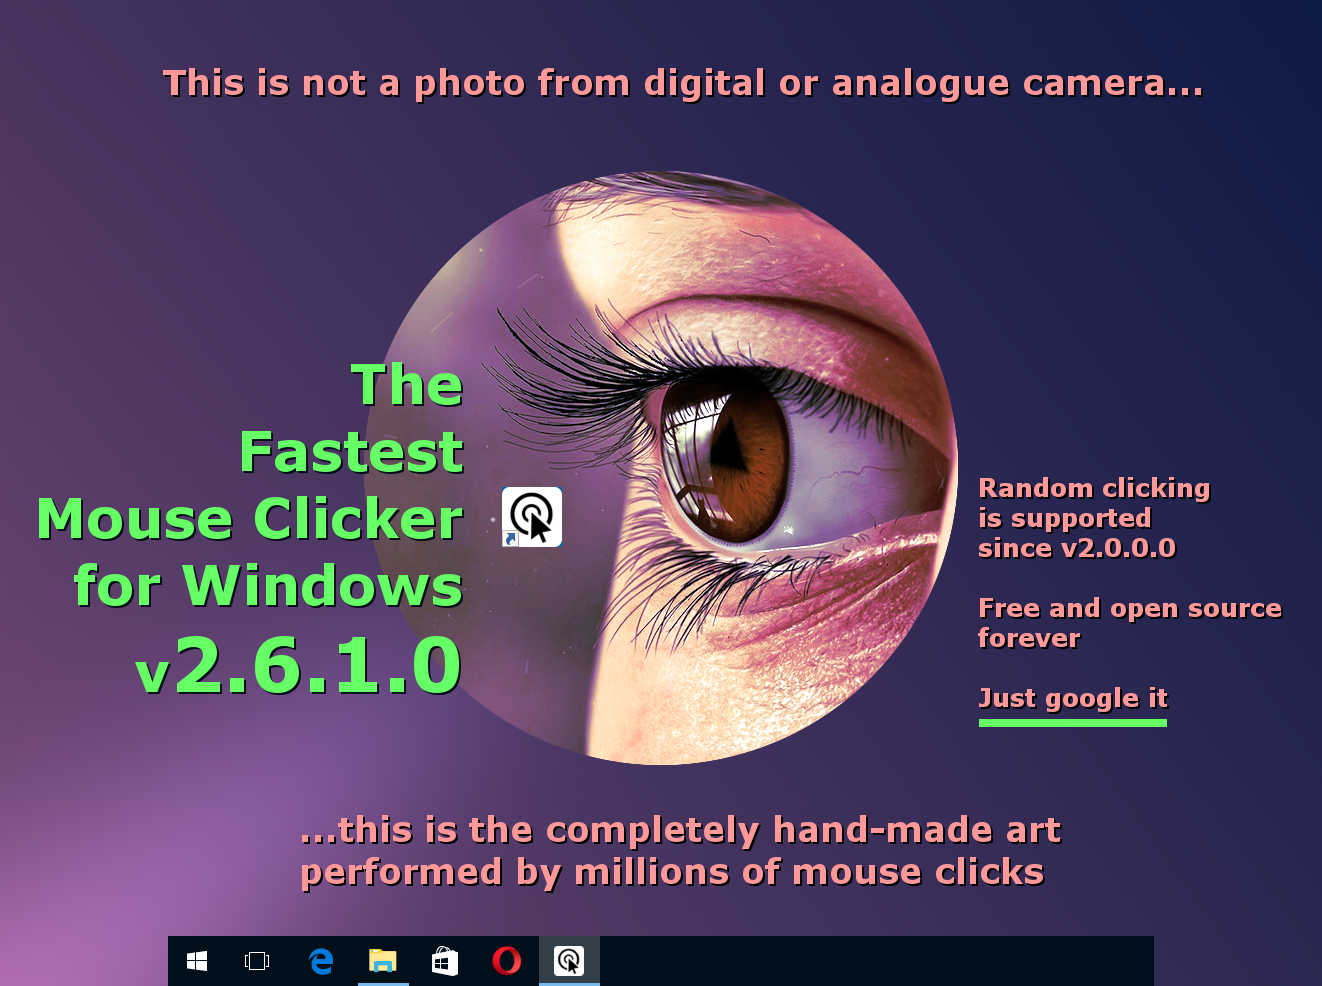 The Fastest Mouse Clicker for Windows version 2.6.1.0: completely hand-made art by the clicker application